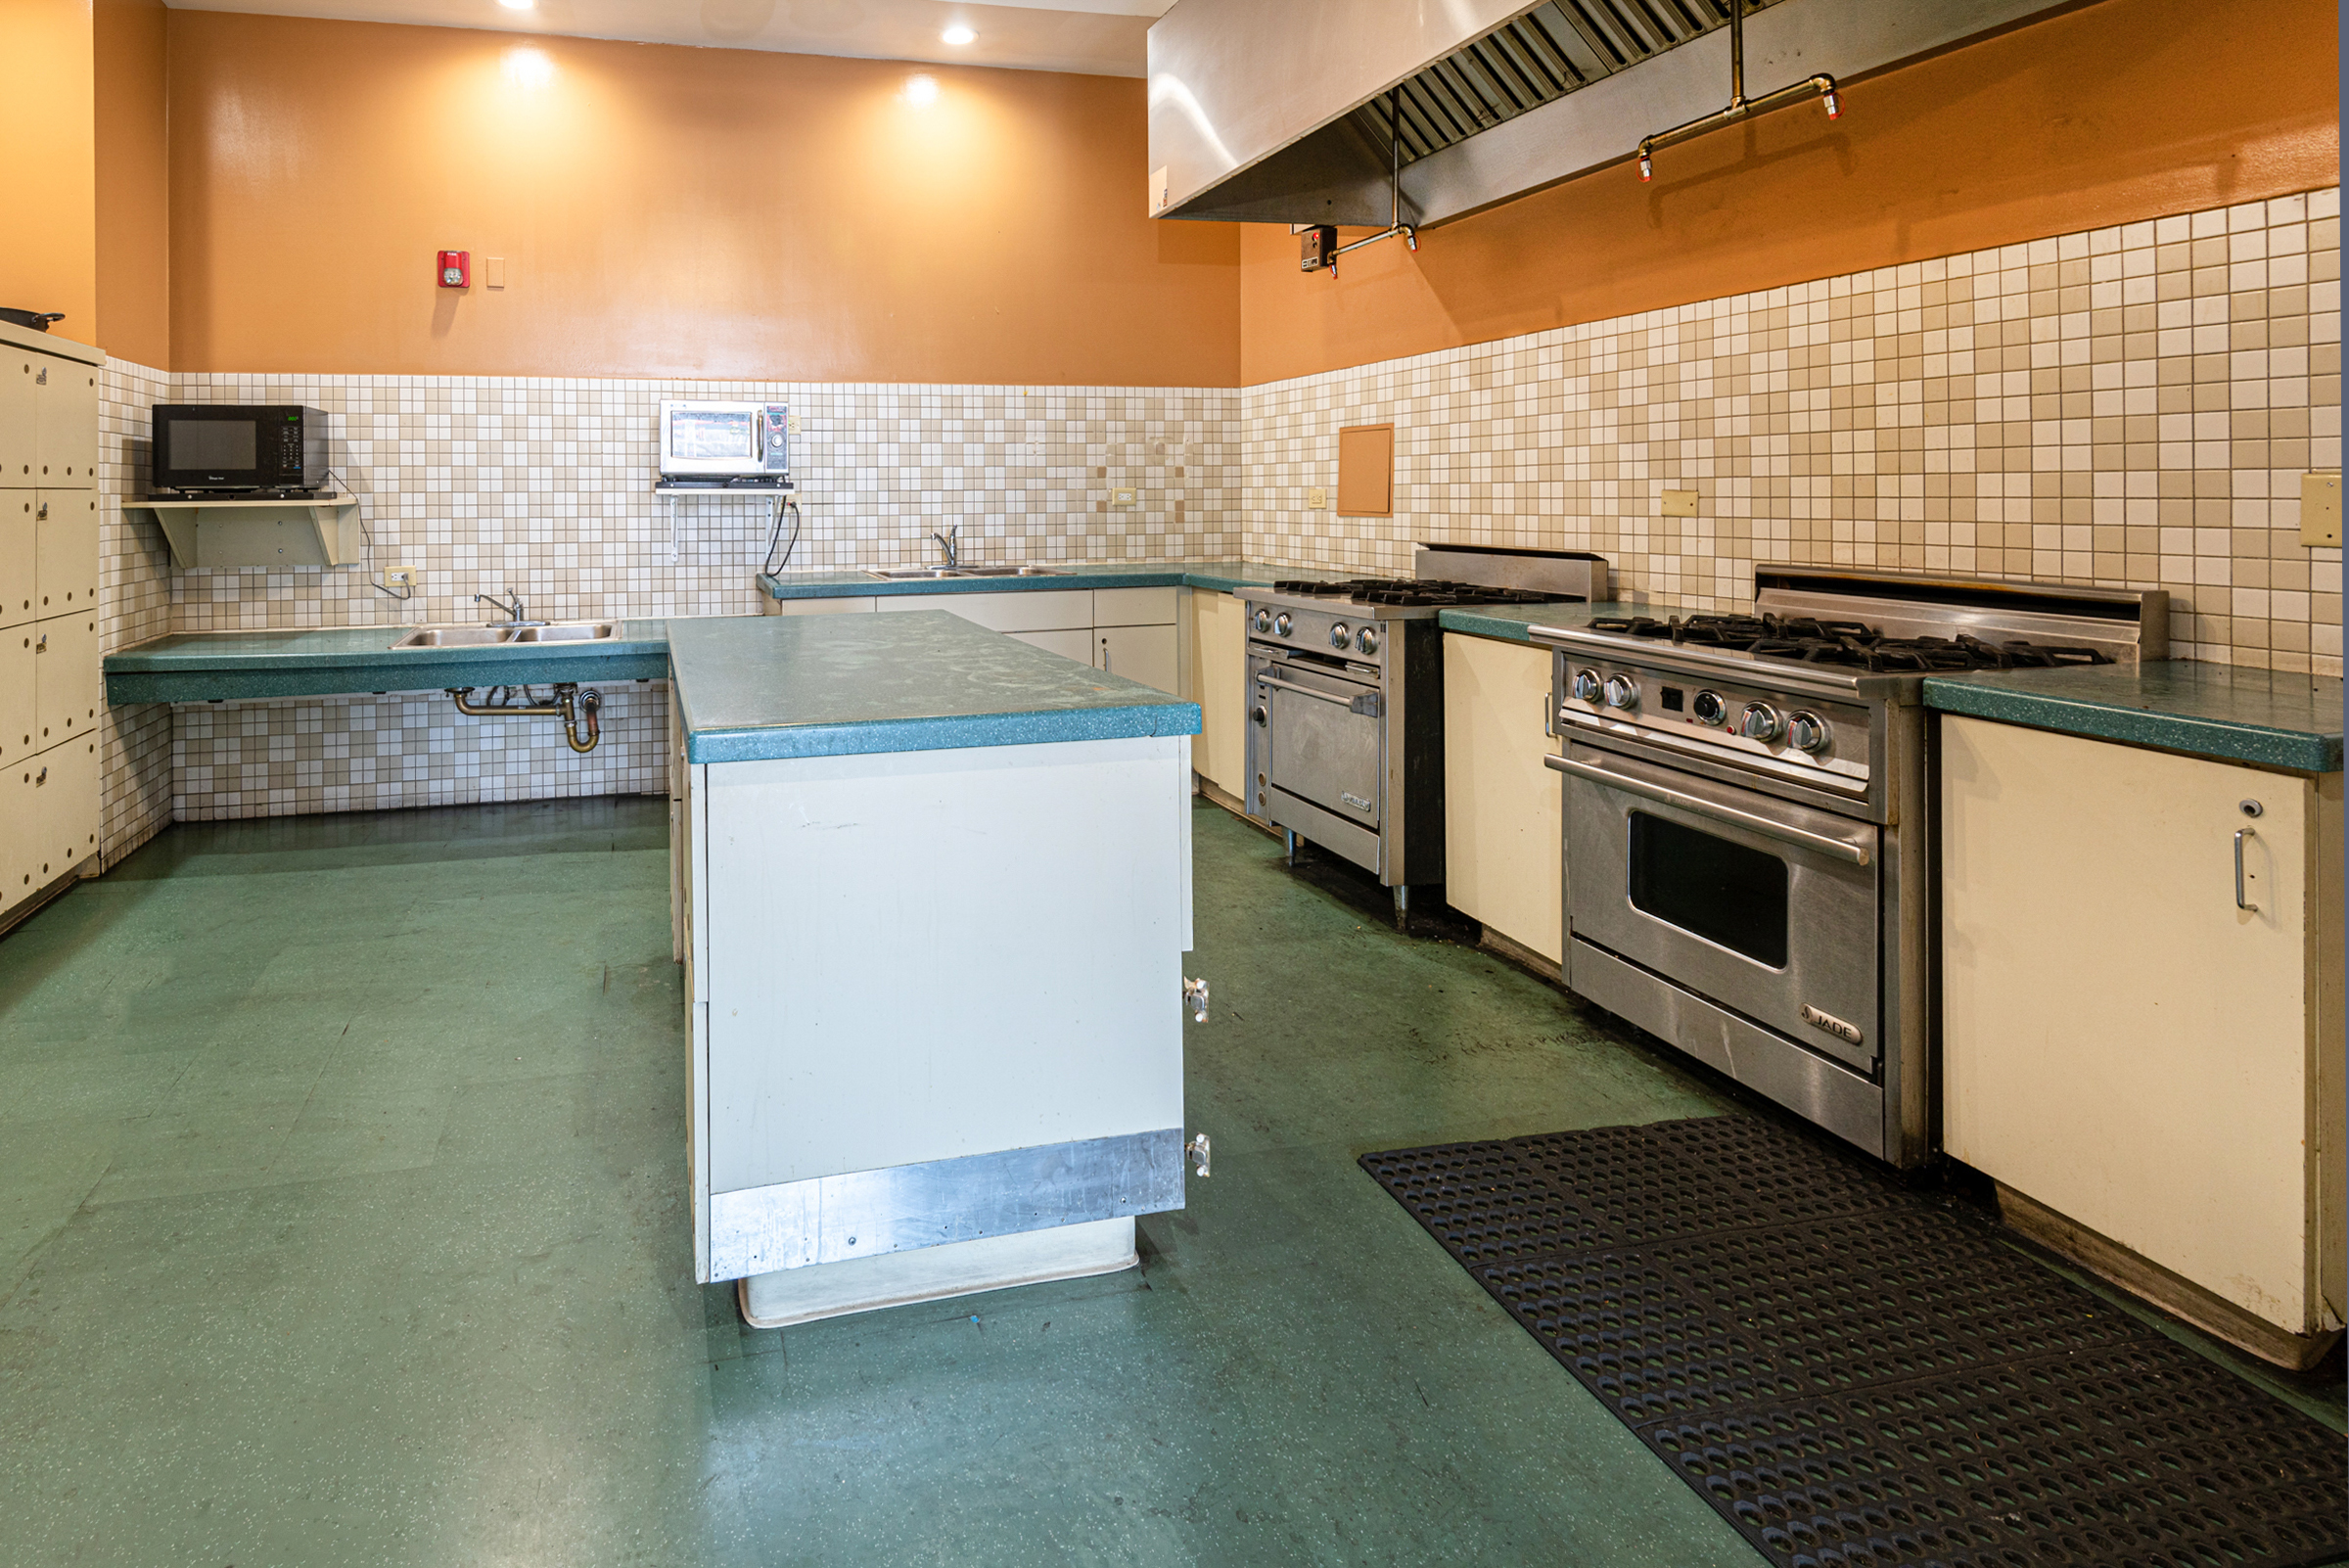 Interior view of the Community Kitchen for the Produce Hotel, 2 stoves, center island, microwave and sink.